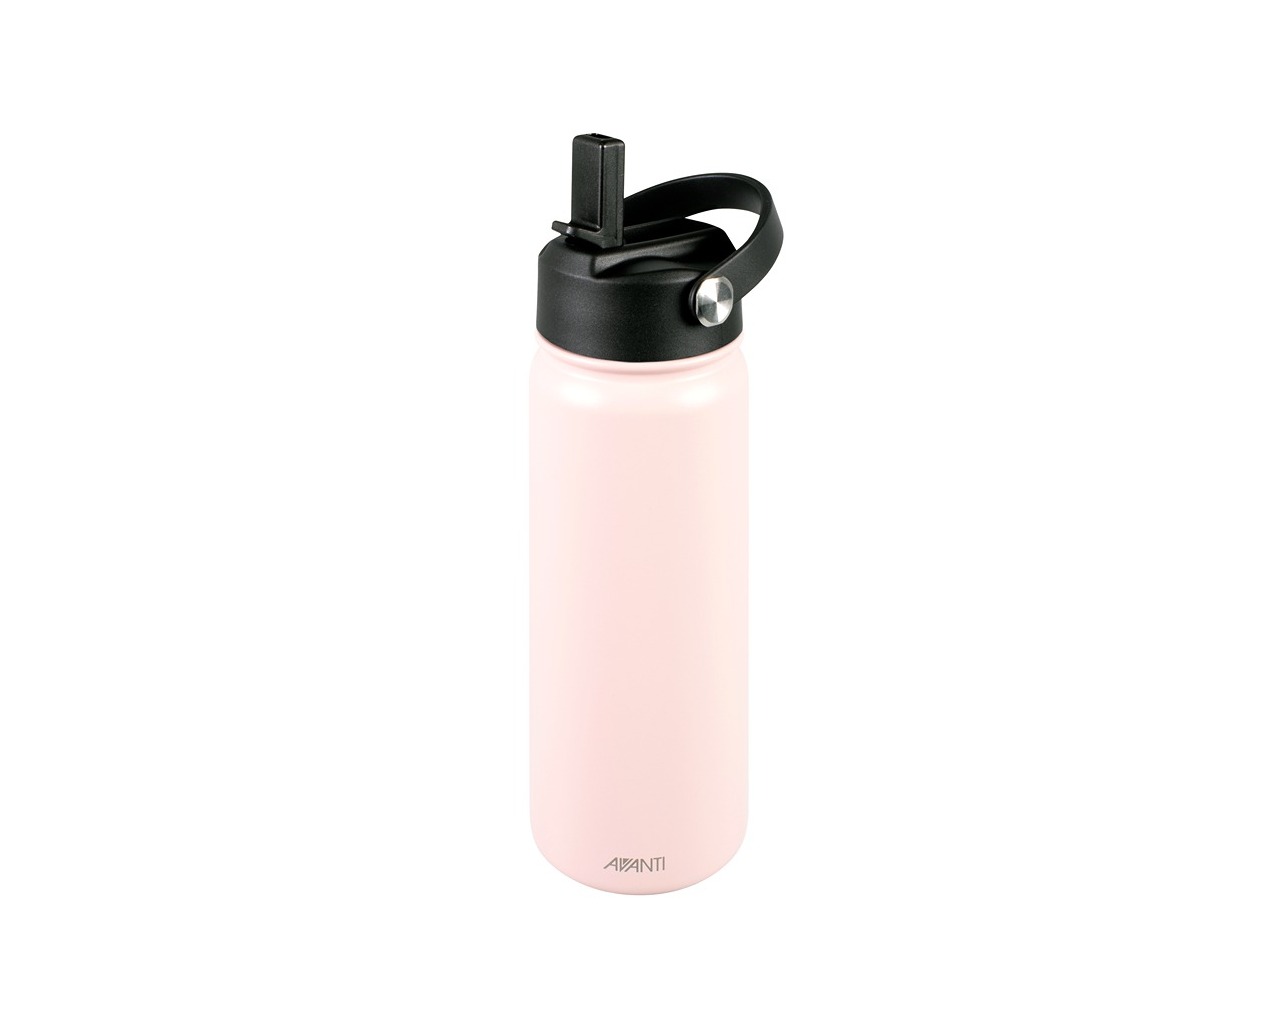 Avanti HydroSport Sipper Insulated Bottle - Pink - 550ml, , hi-res image number null